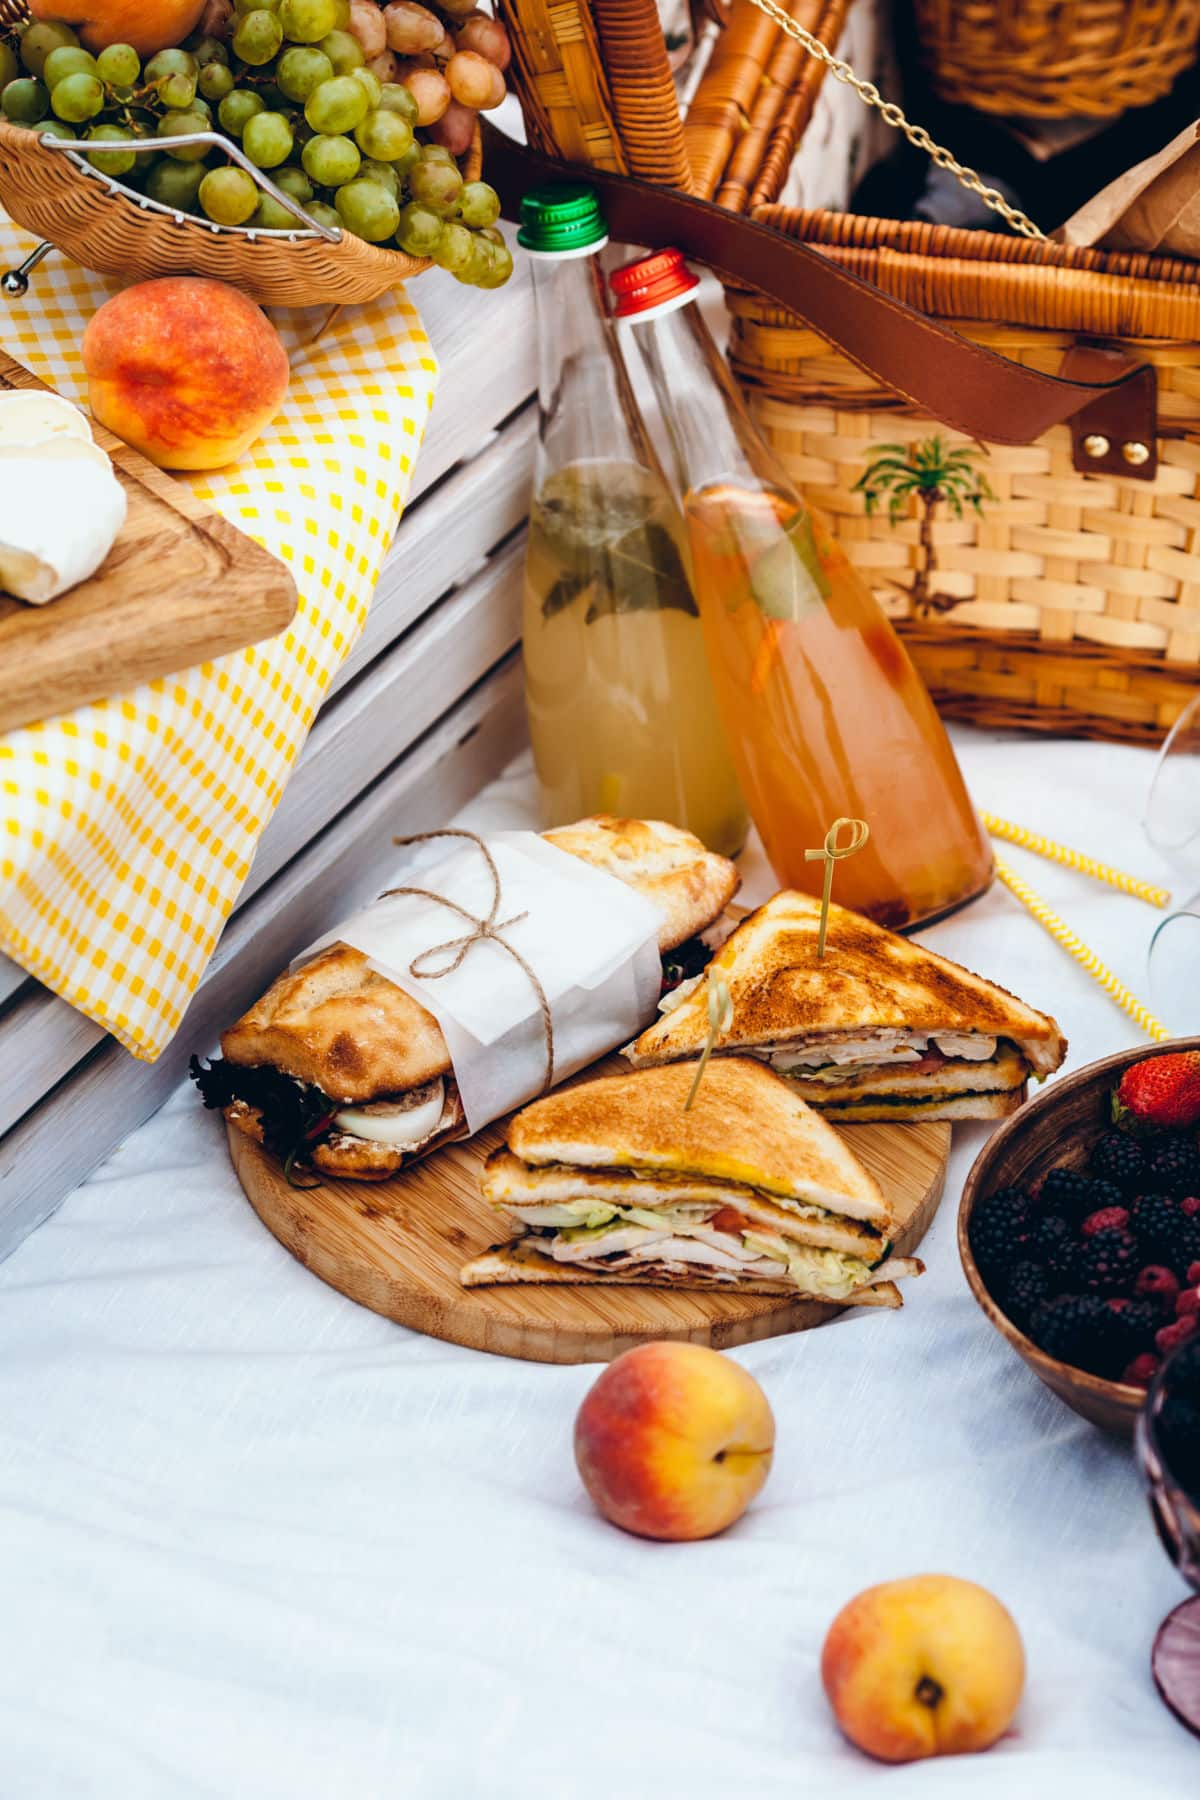 Drinks, sandwiches, and a basket to pack for a picnic.